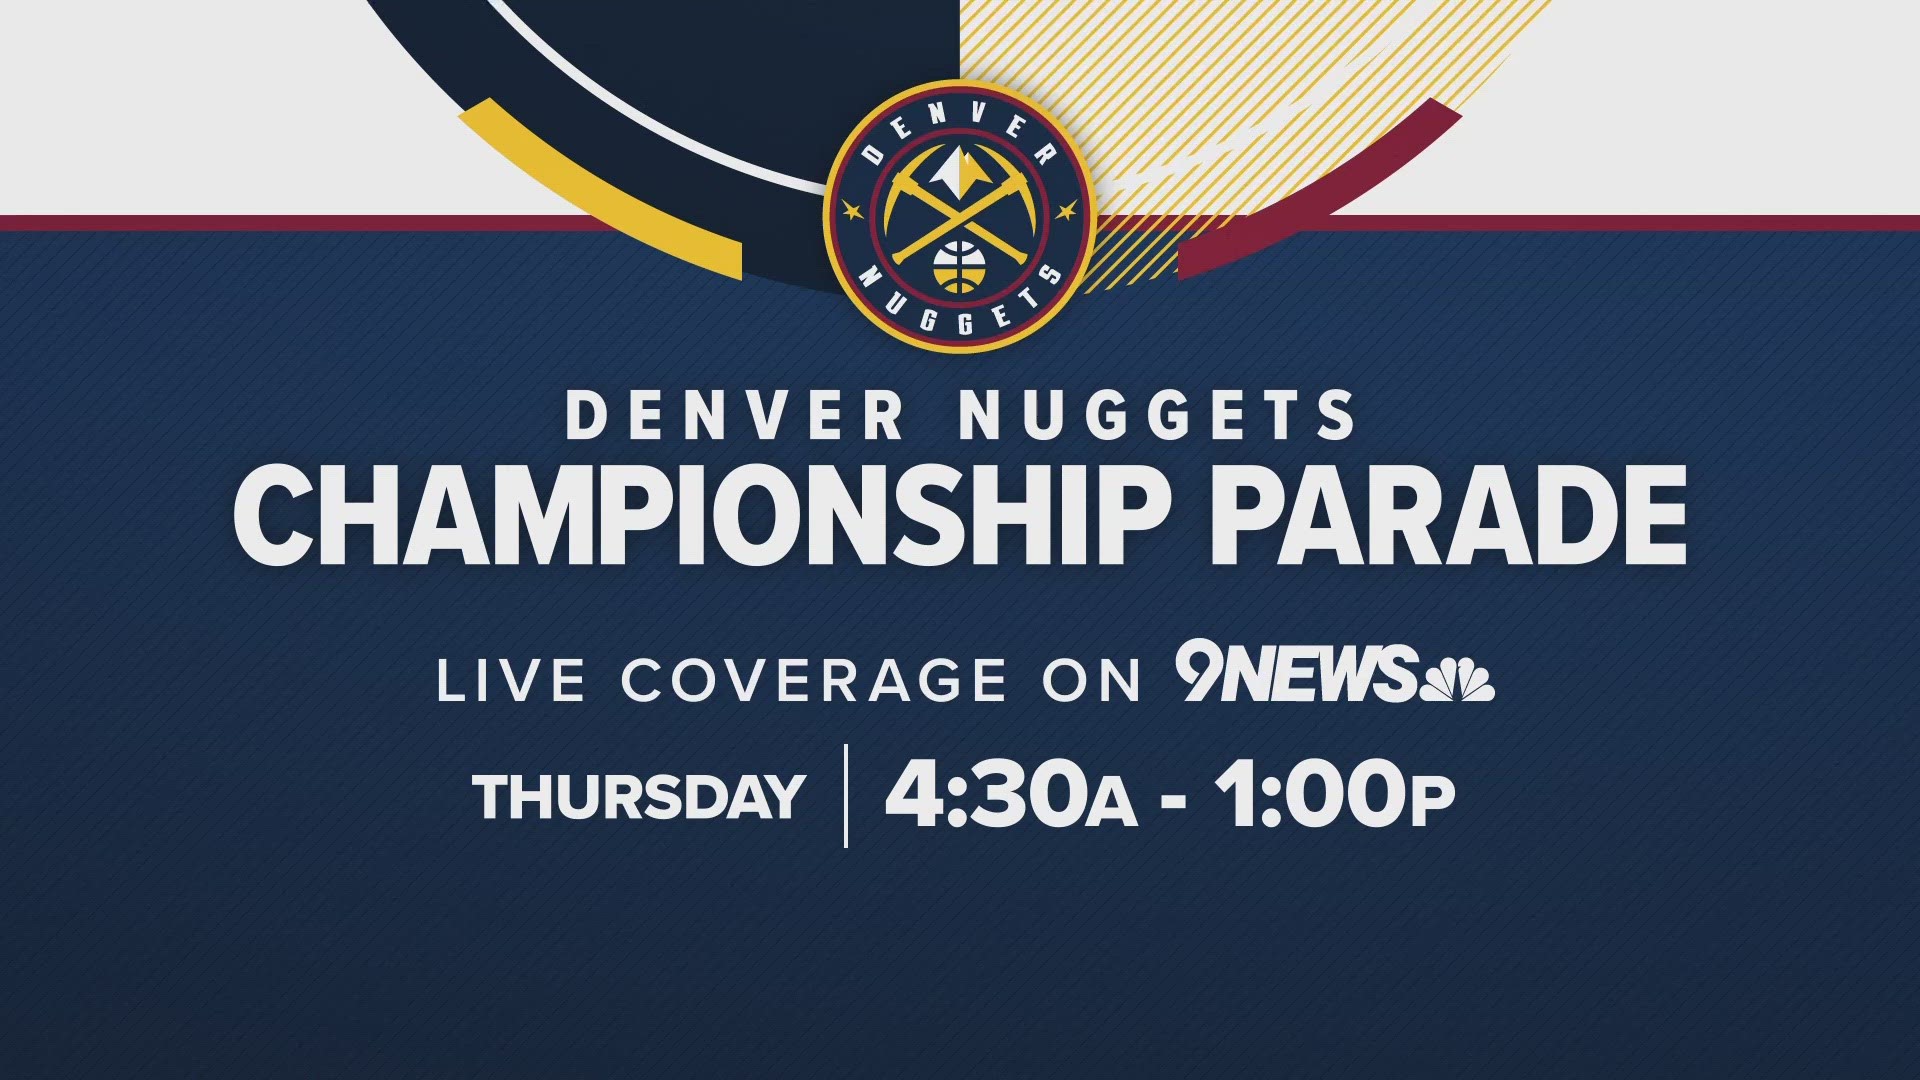 Denver Nuggets victory parade planned for Thursday